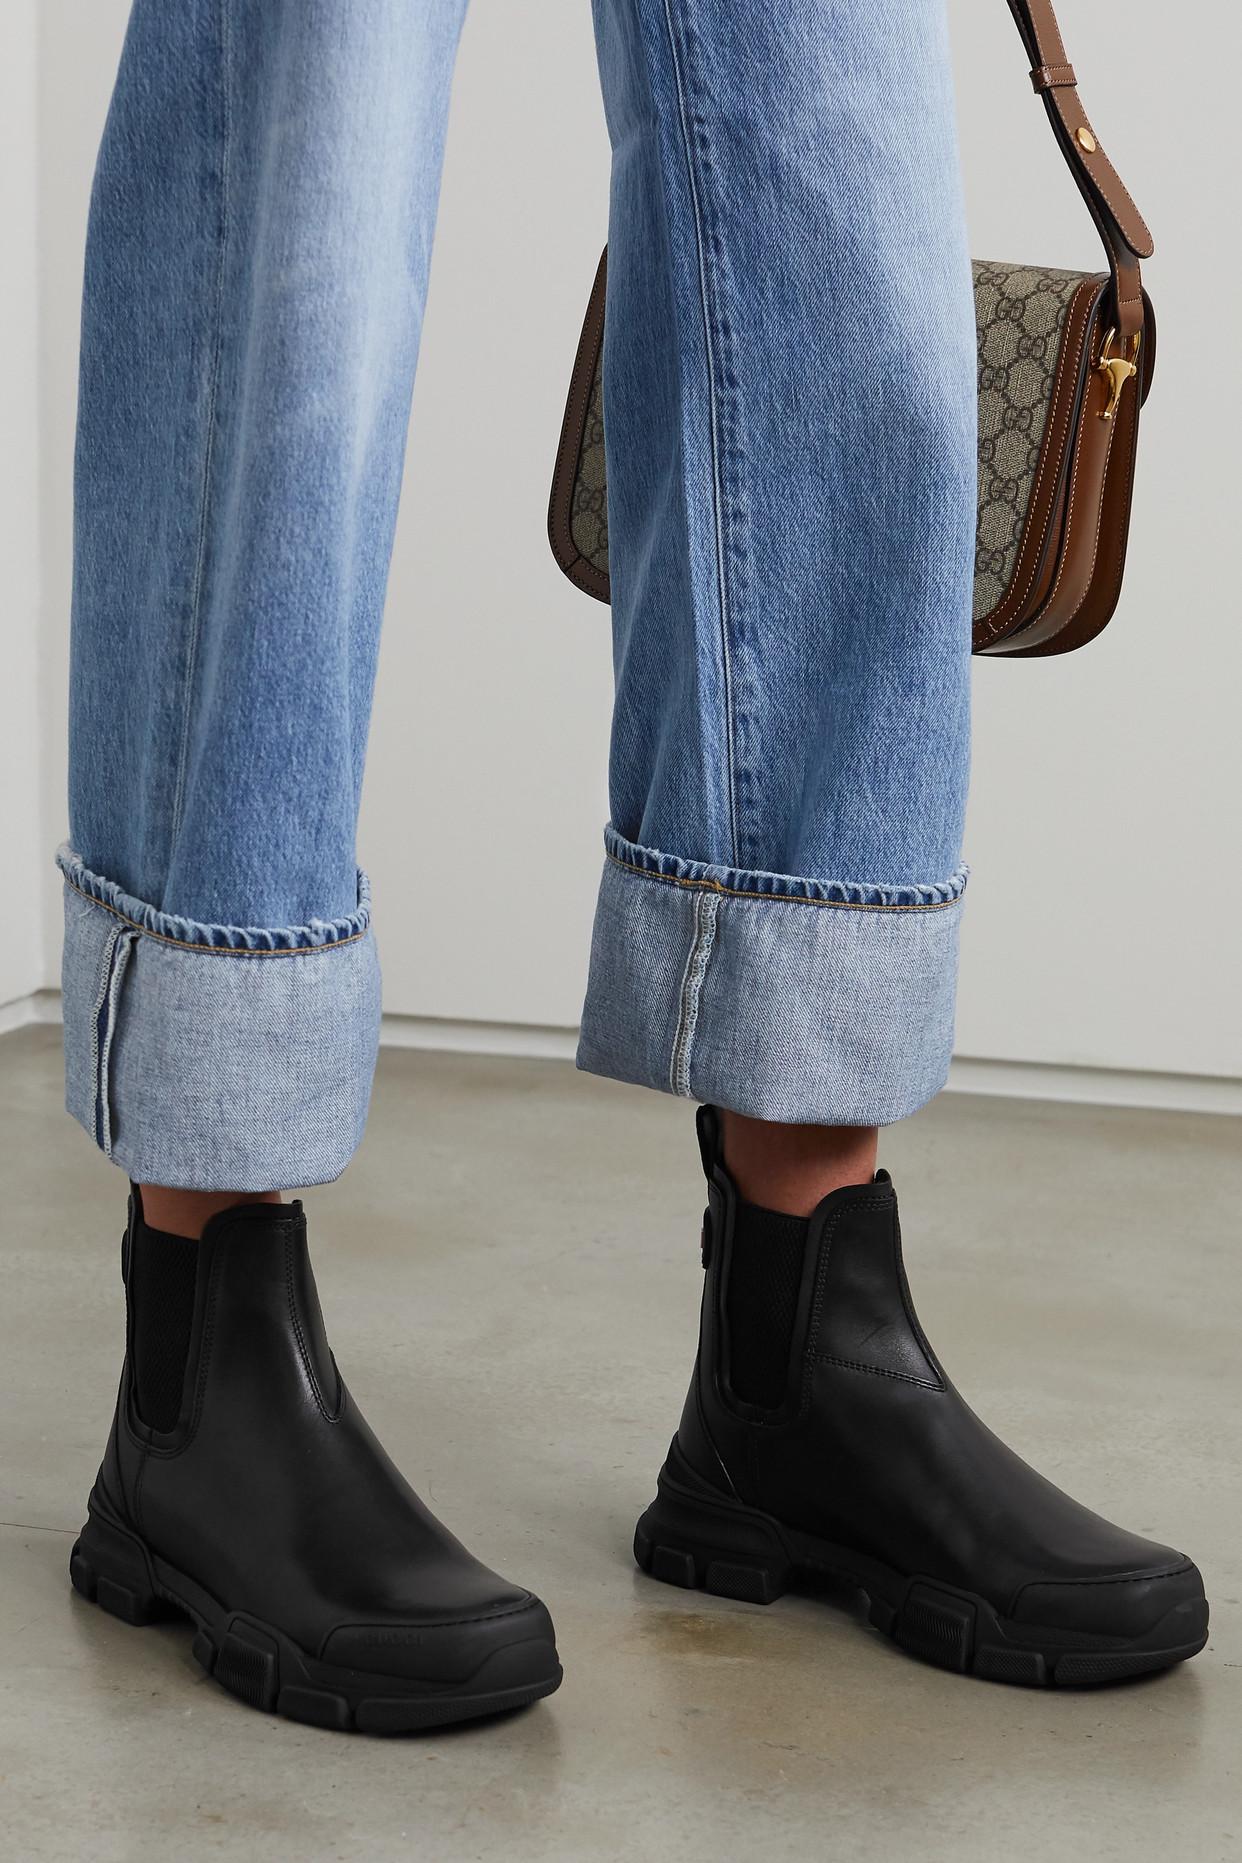 Gucci Leon Chelsea Boots in Black | Lyst